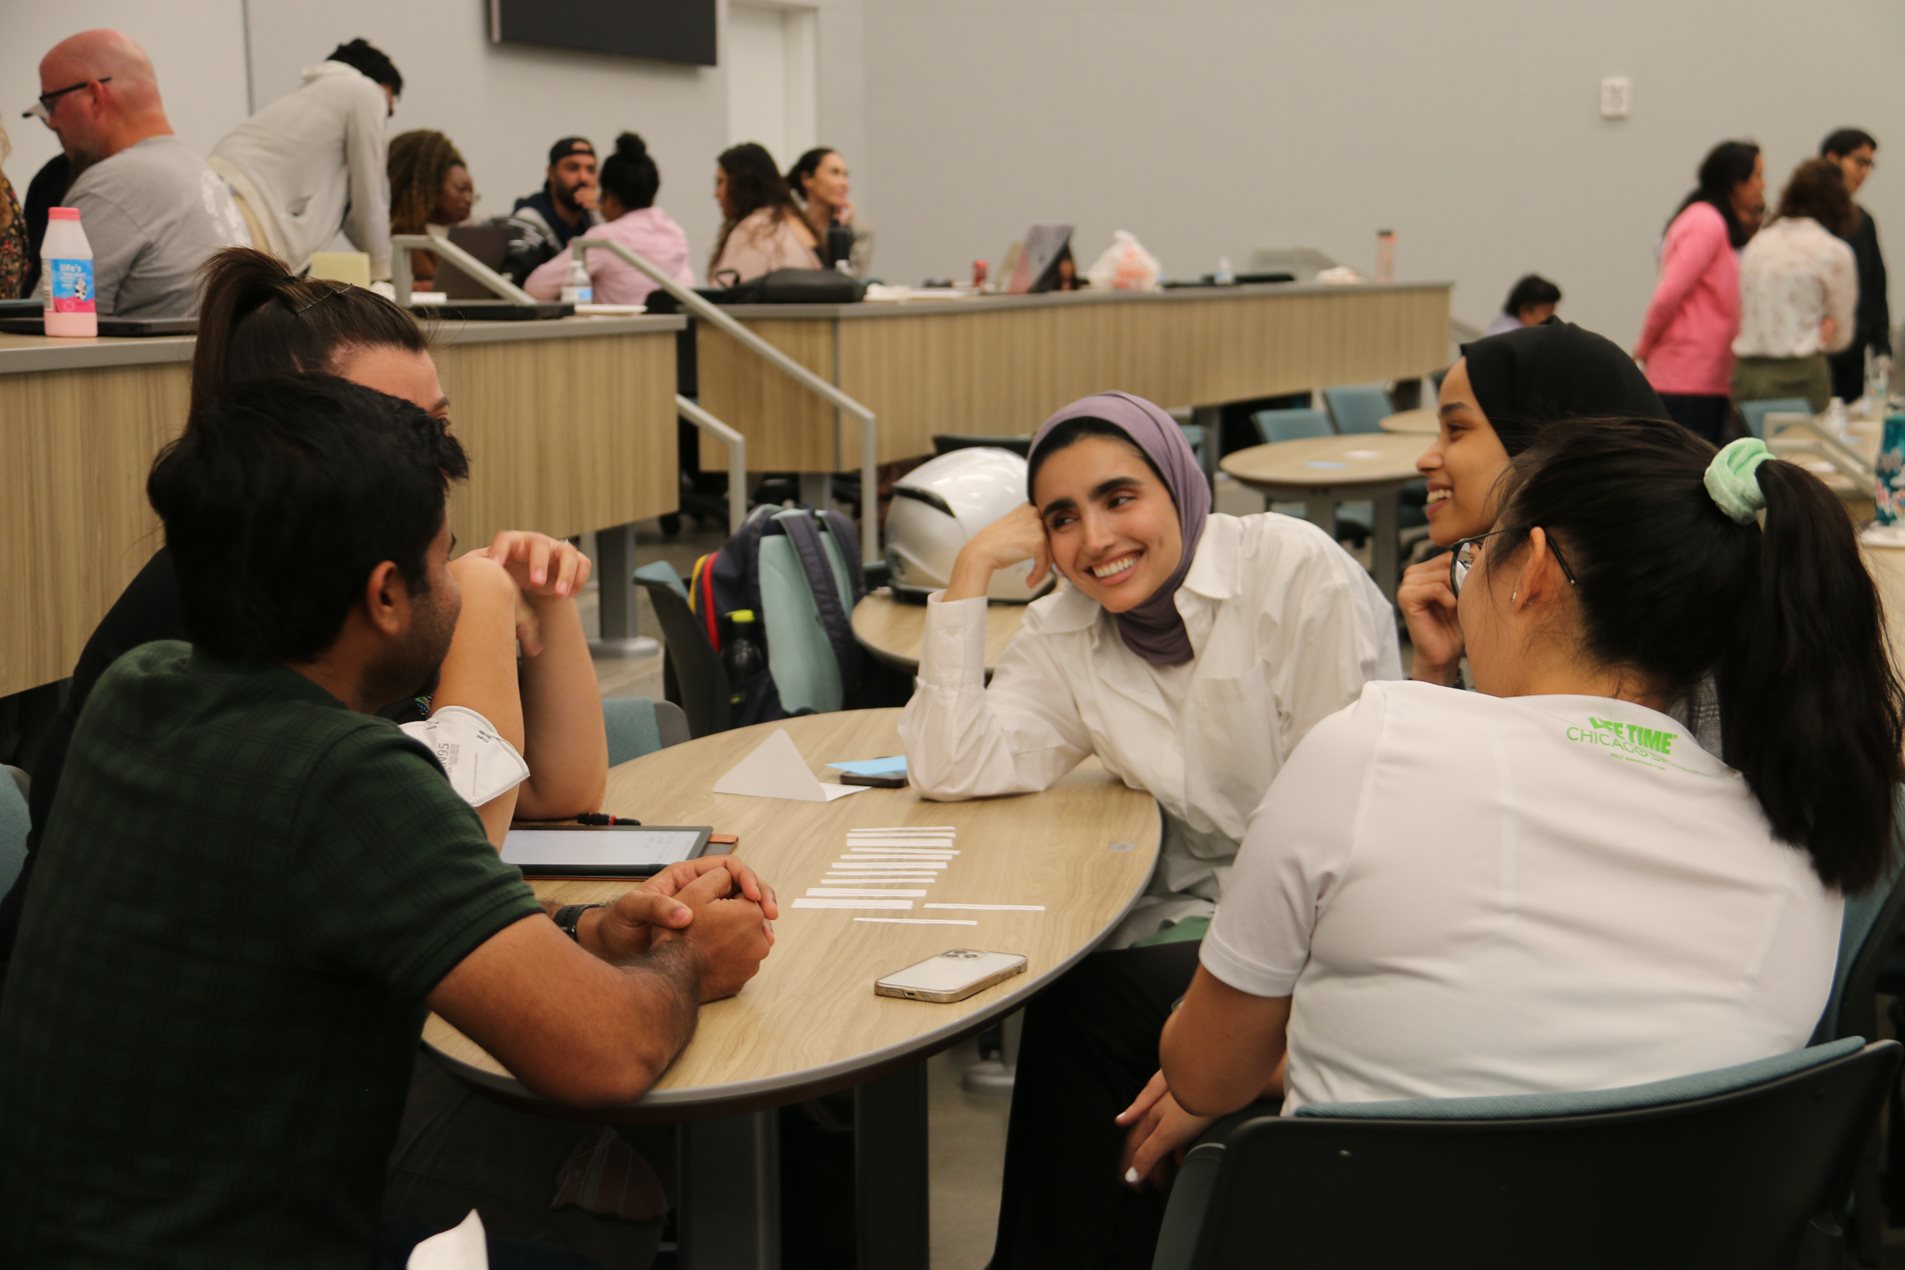 A group of students sit together at a table.